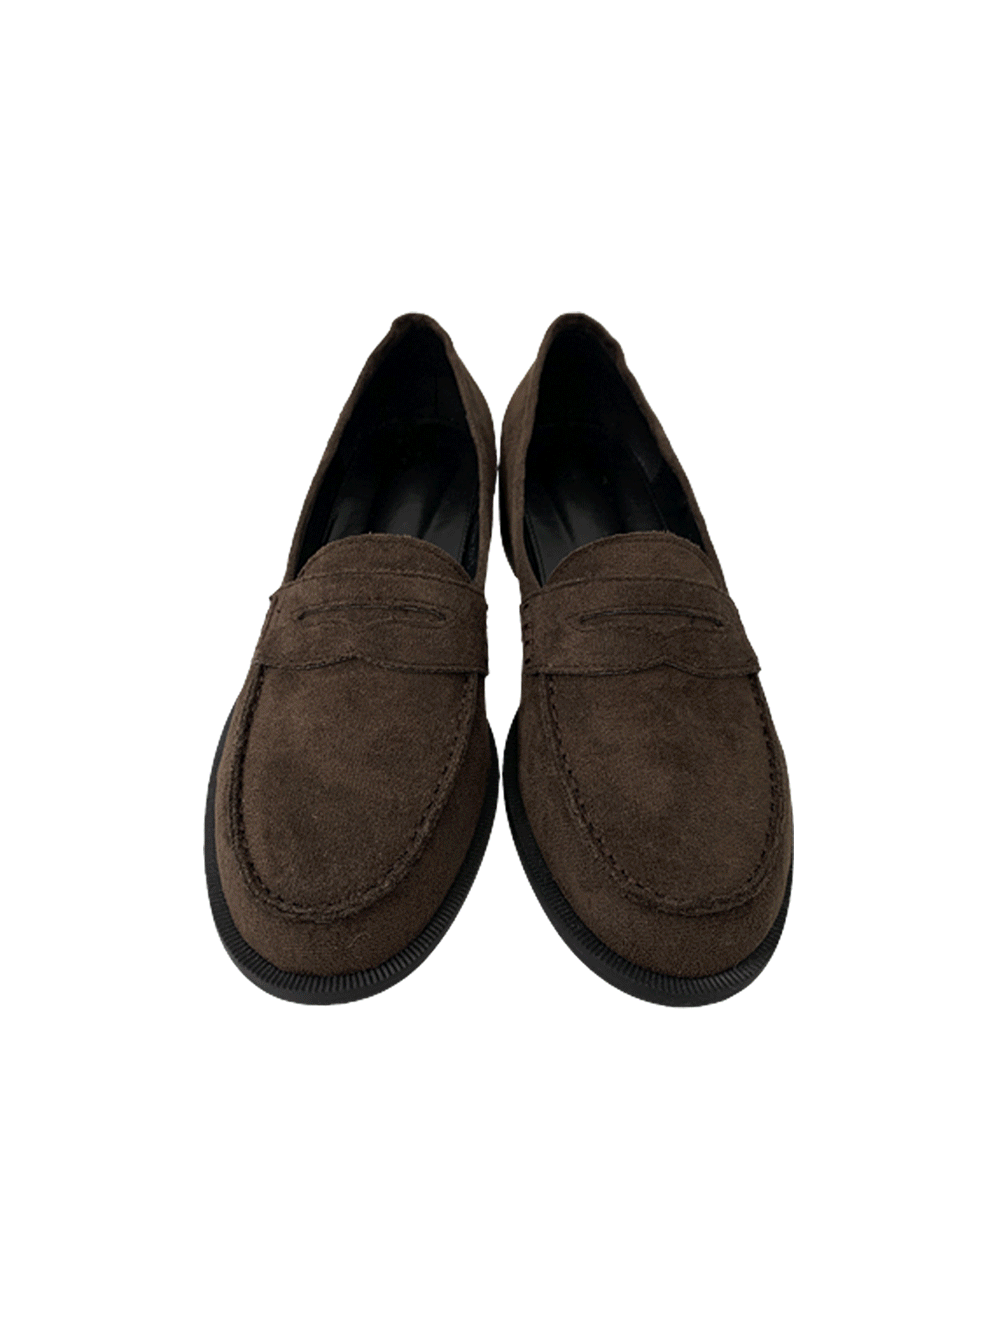 tez loafer - shoes